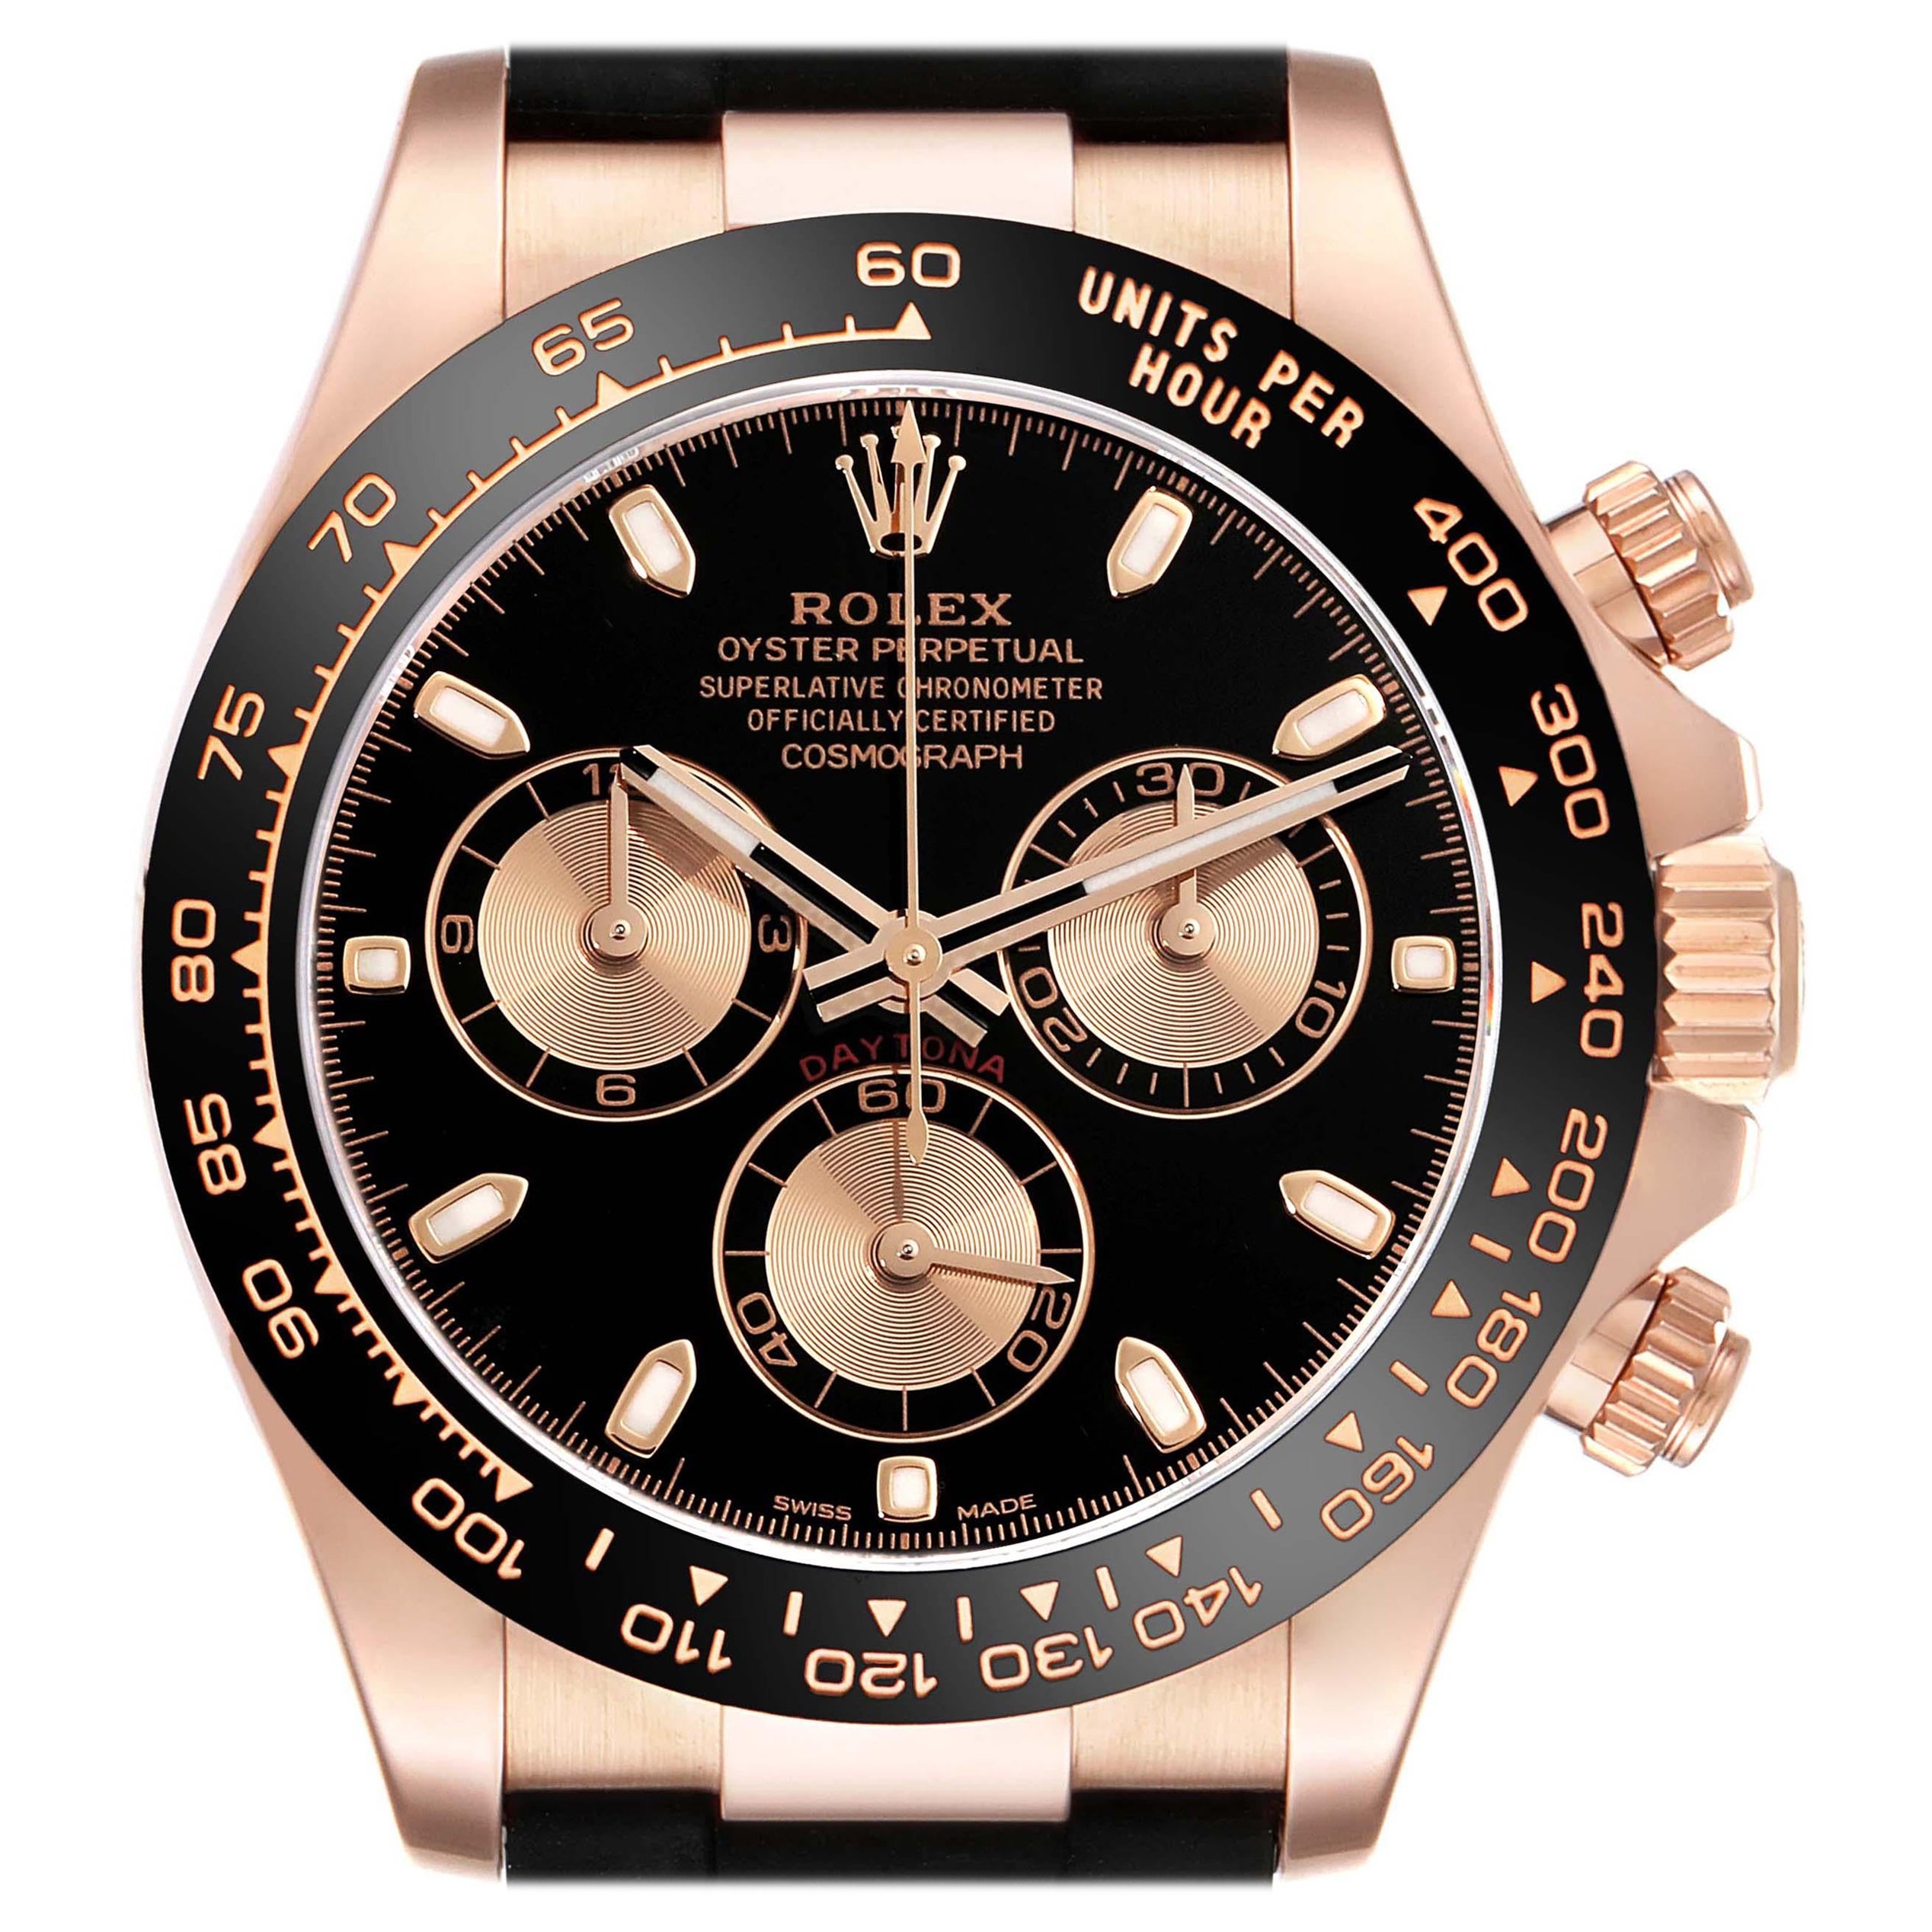 Rolex Cosmograph Daytona Rose Gold Mens Watch 116515 Box Card For Sale